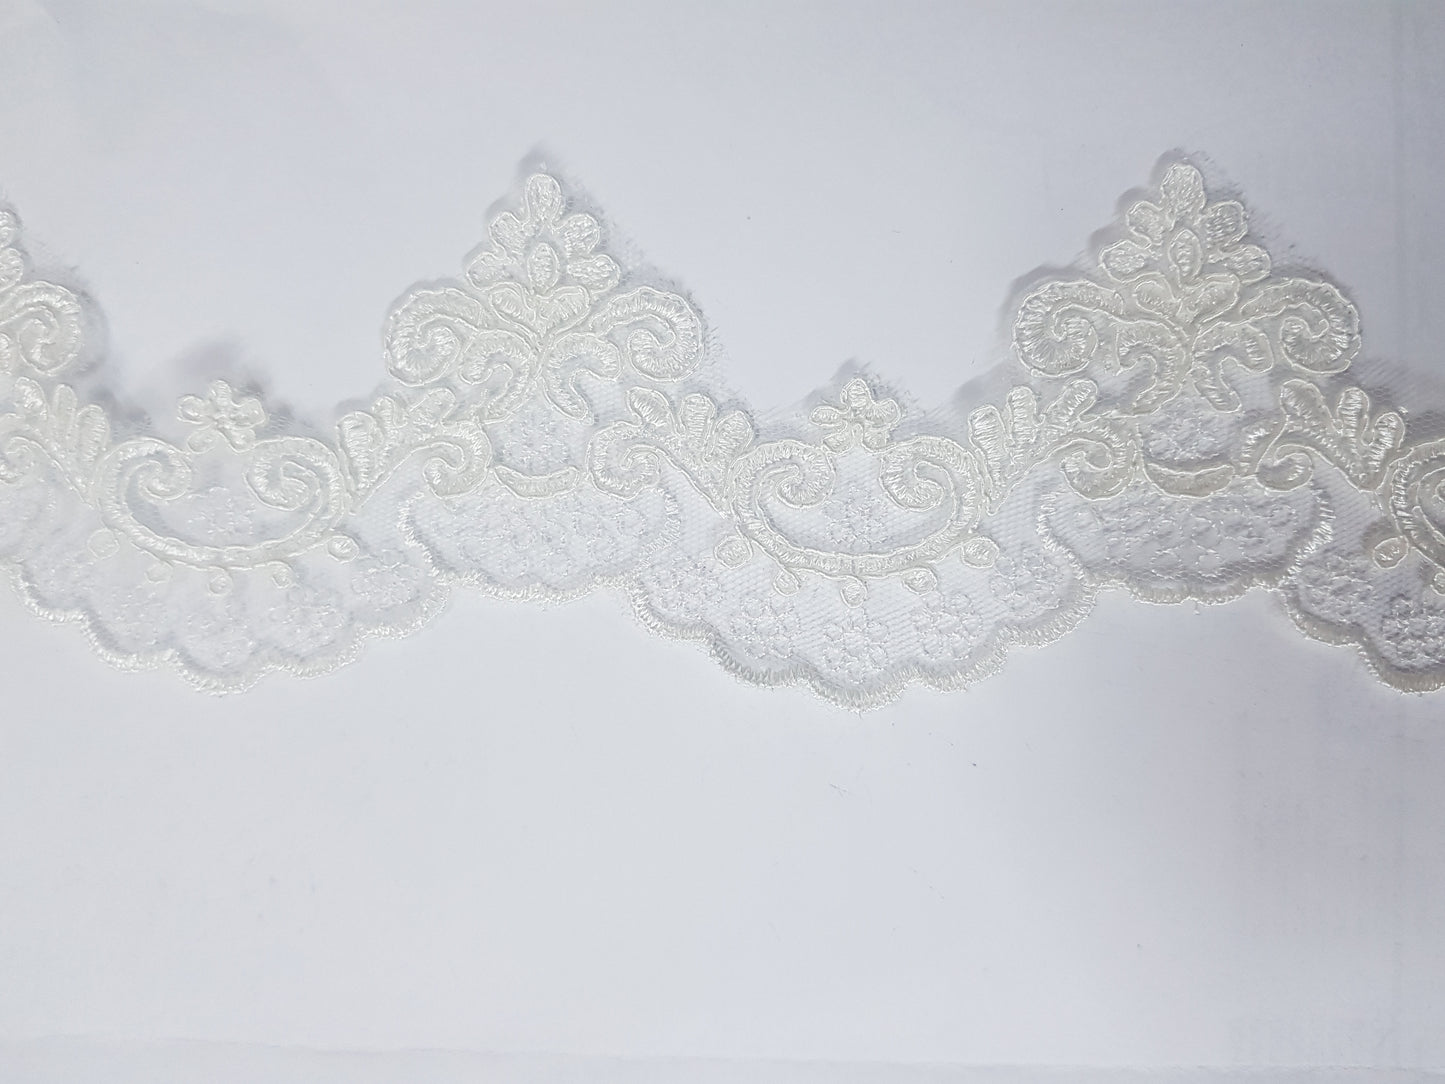 6 cm wide French Lace - 13010